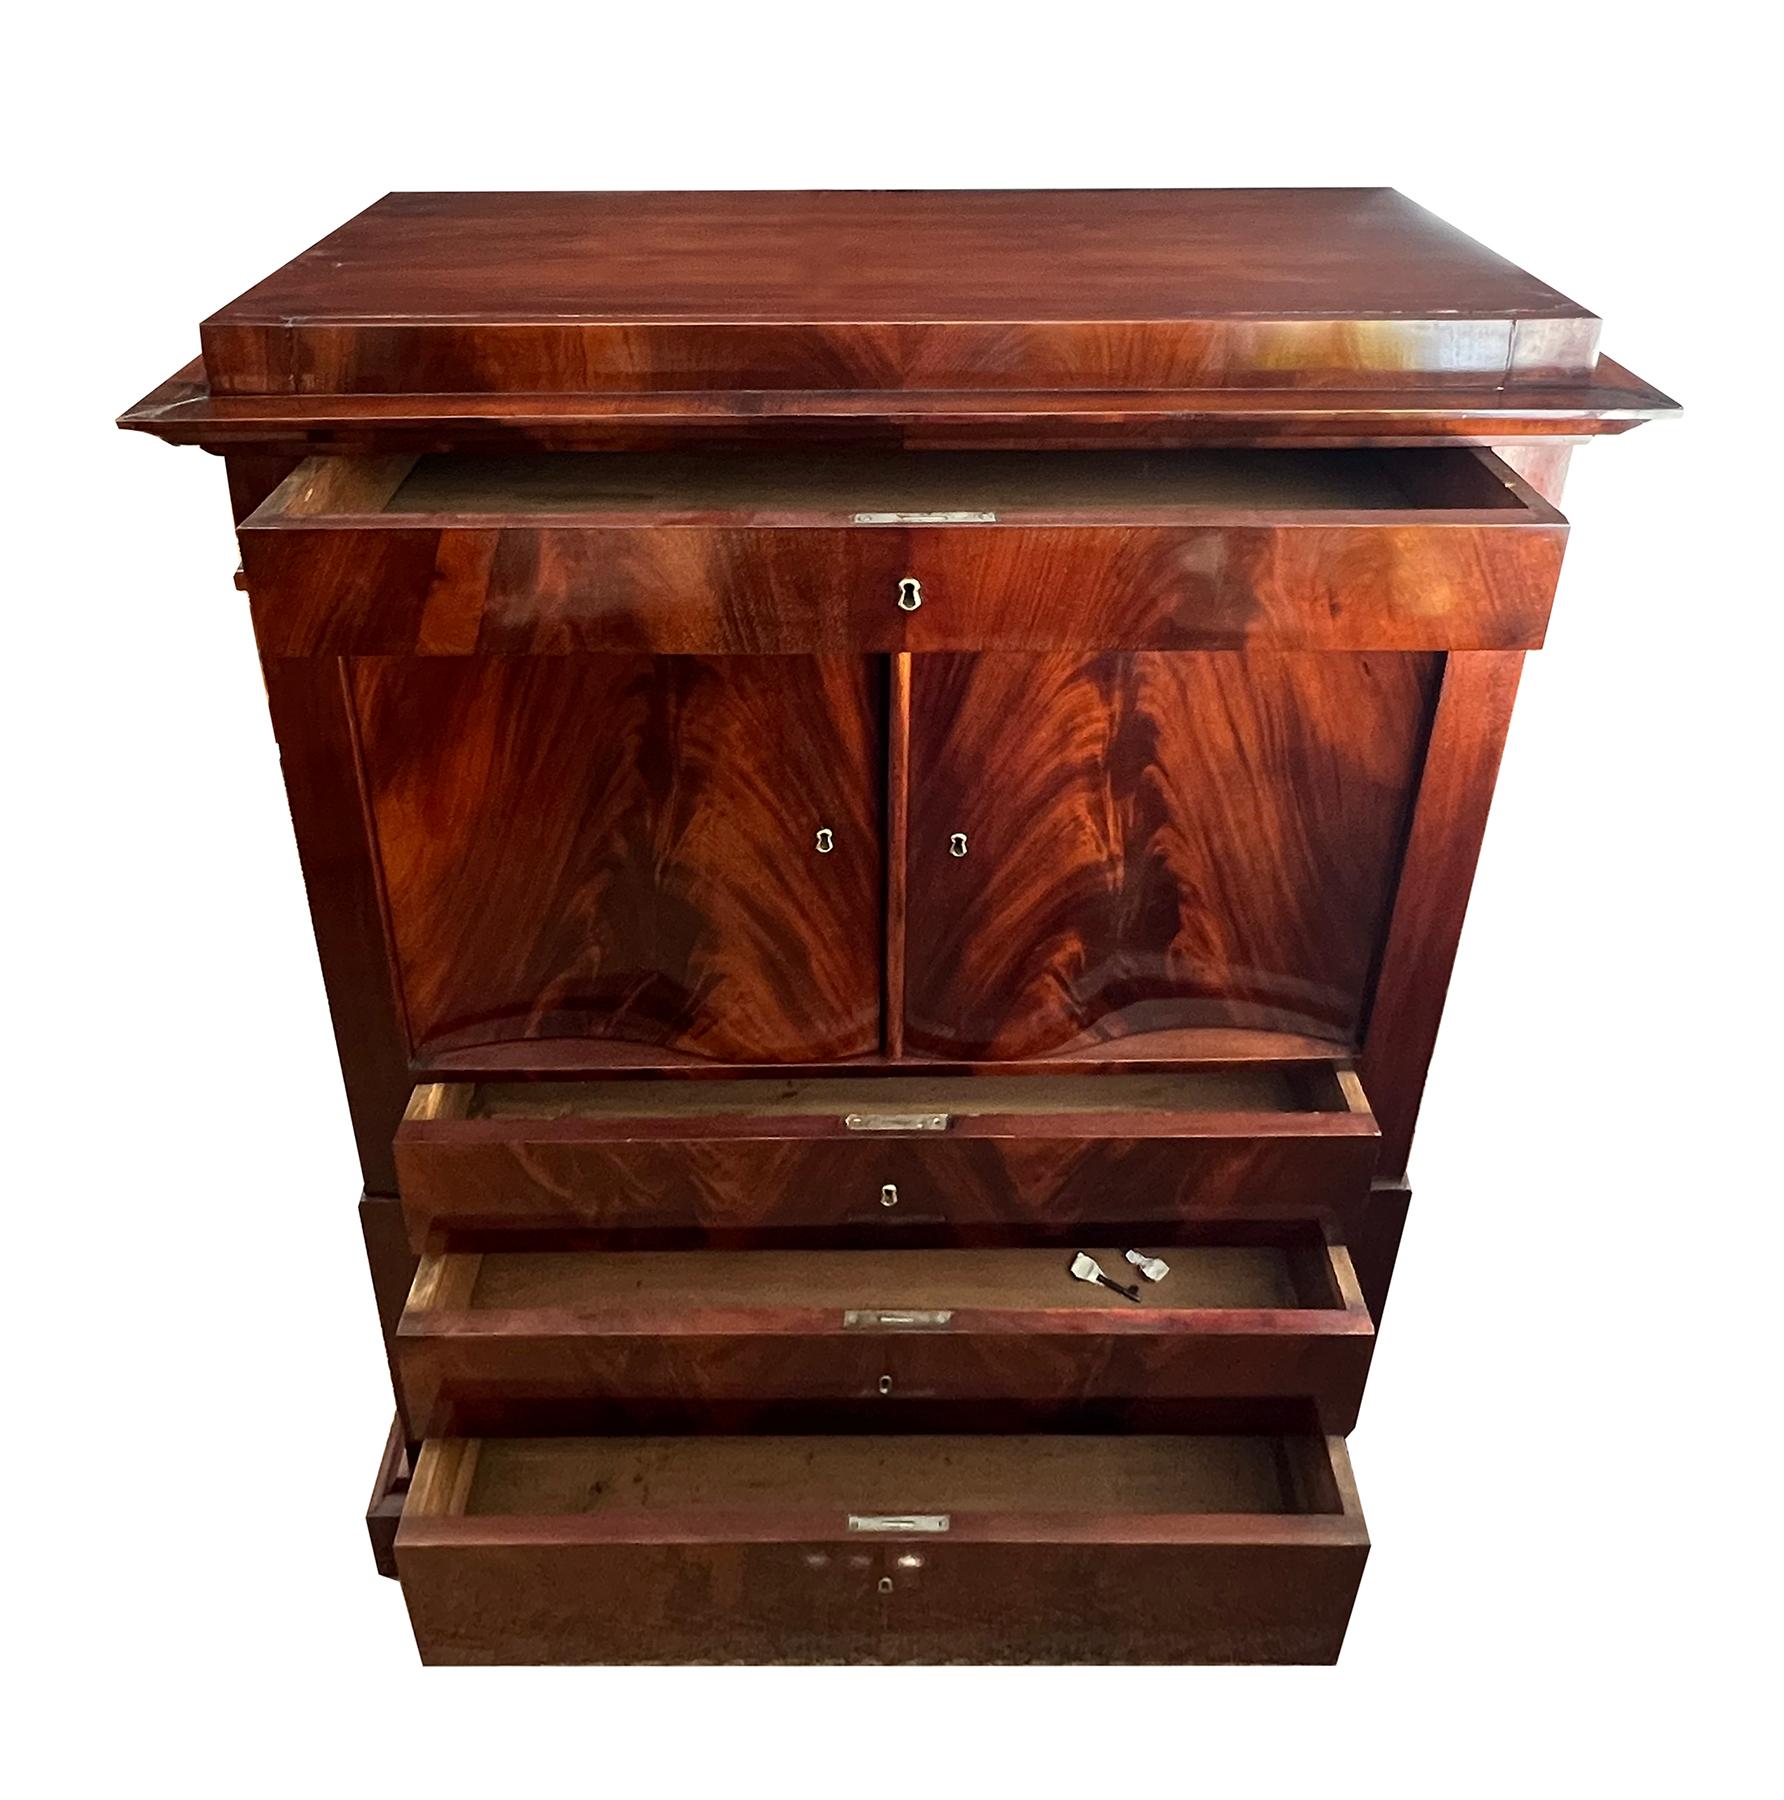 Danish Empire Tall Chest of Drawers in Book-Matched Flame Mahogany Veneer In Good Condition For Sale In San Francisco, CA